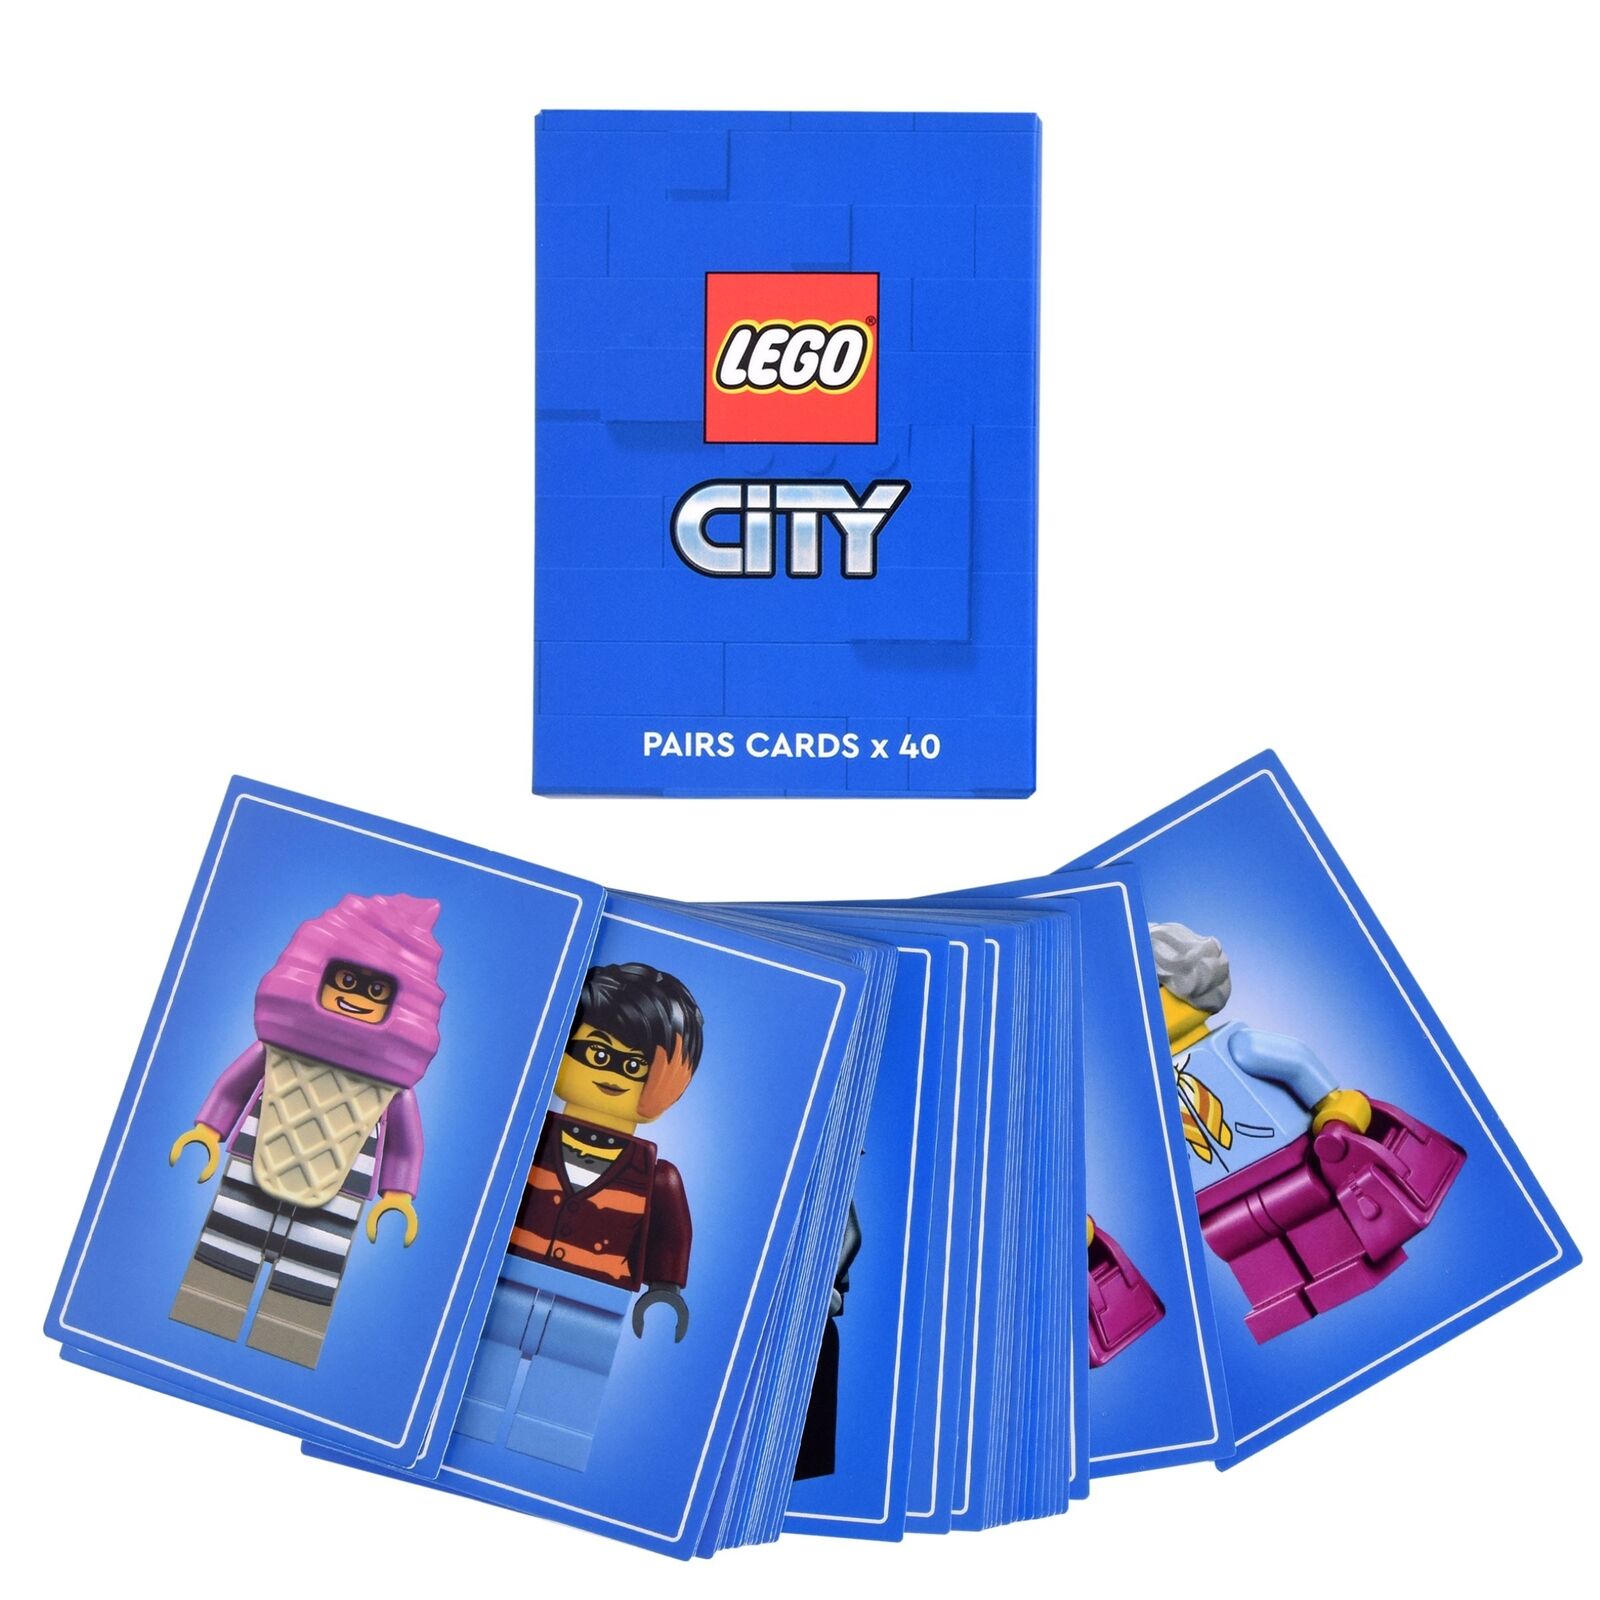 LEGO City Pair Game 5007203 VIP Exclusive 2022 New